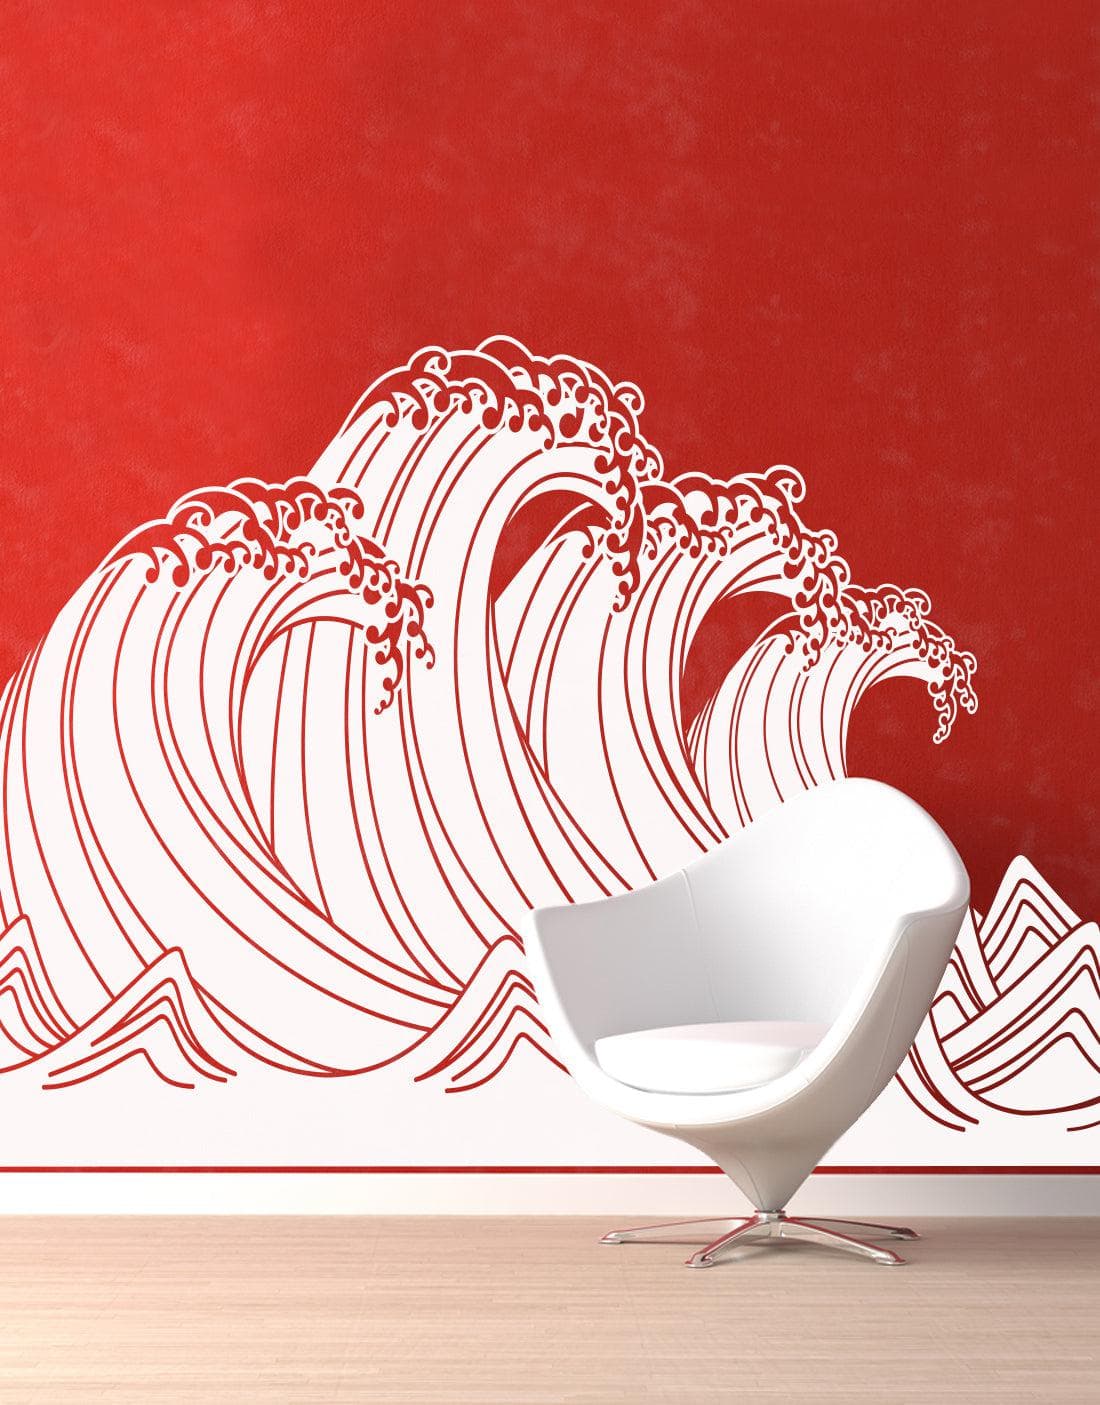 Japanese Typhoon Wave Abstract Vinyl Wall Decal Sticker #6110